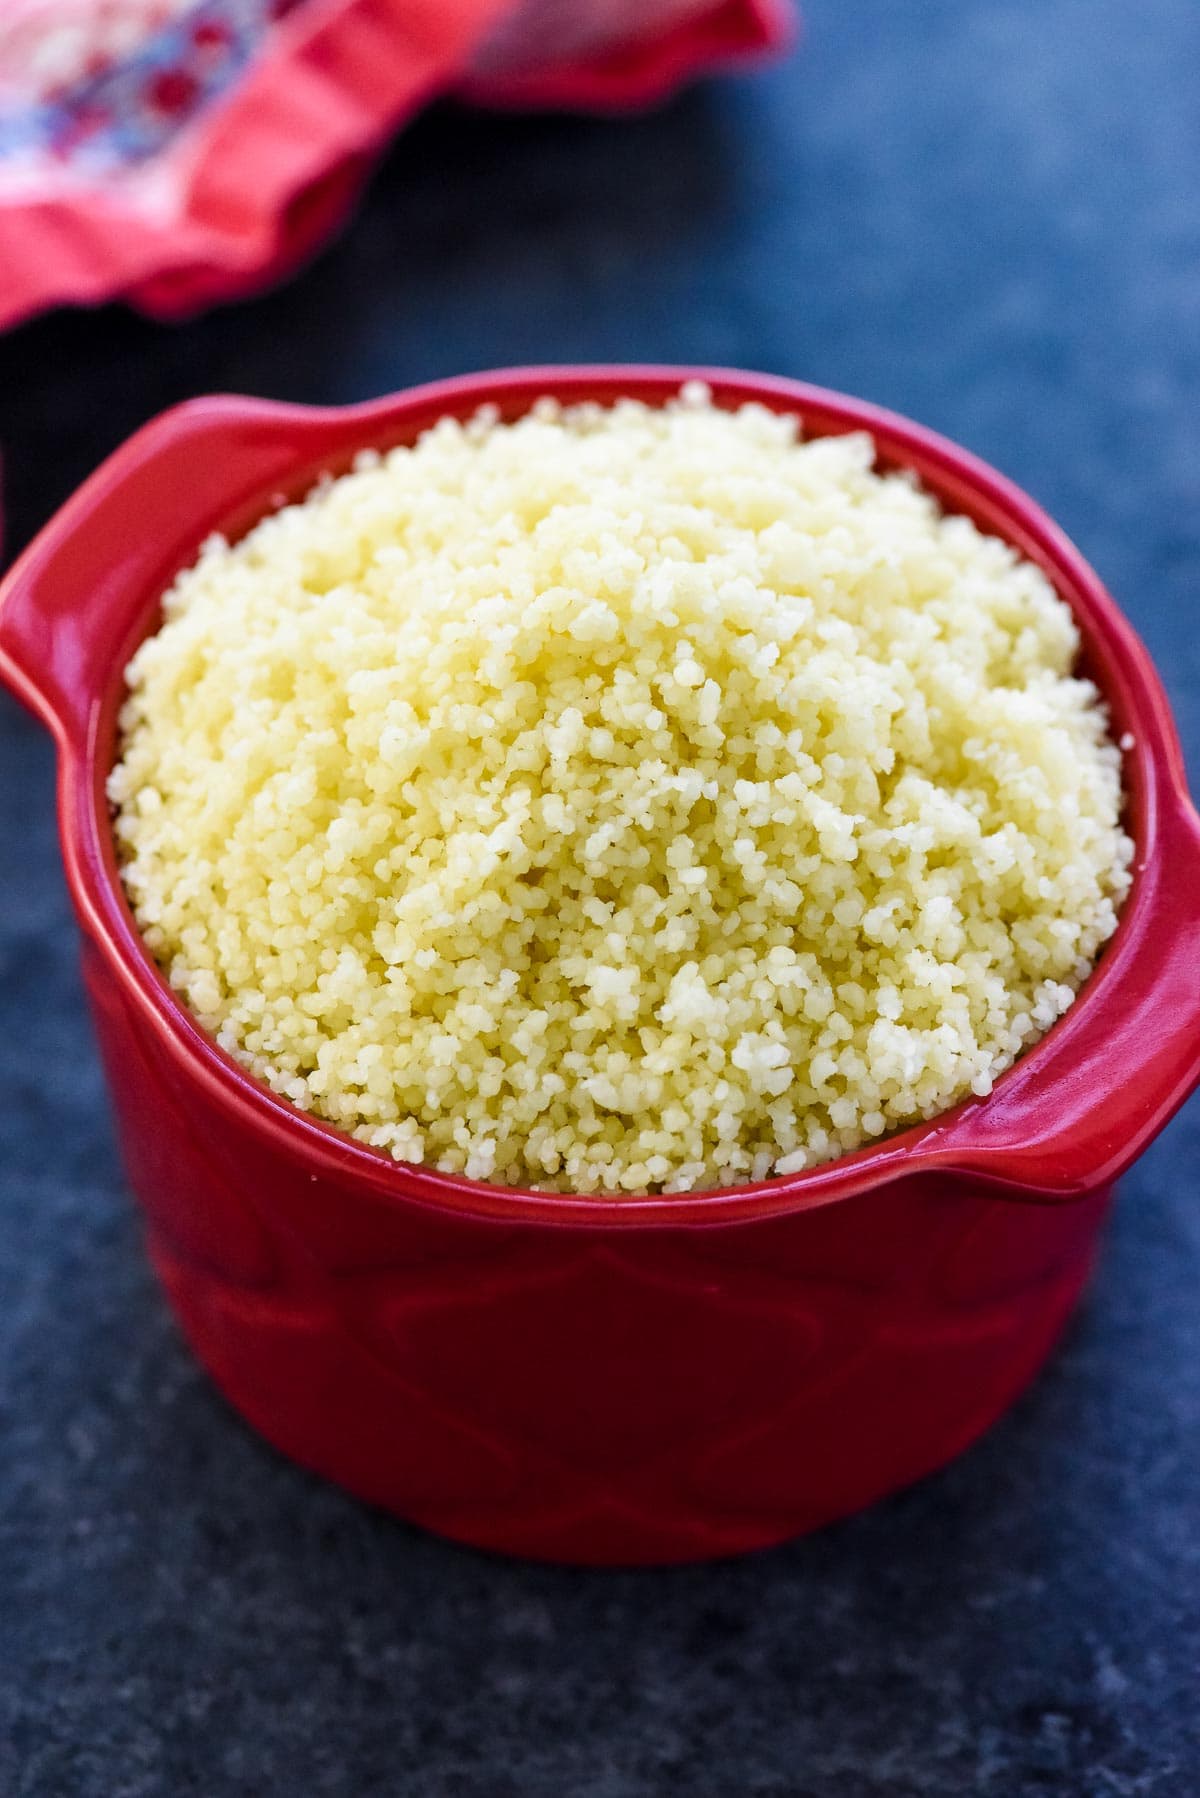 Couscous in a small red bowl.